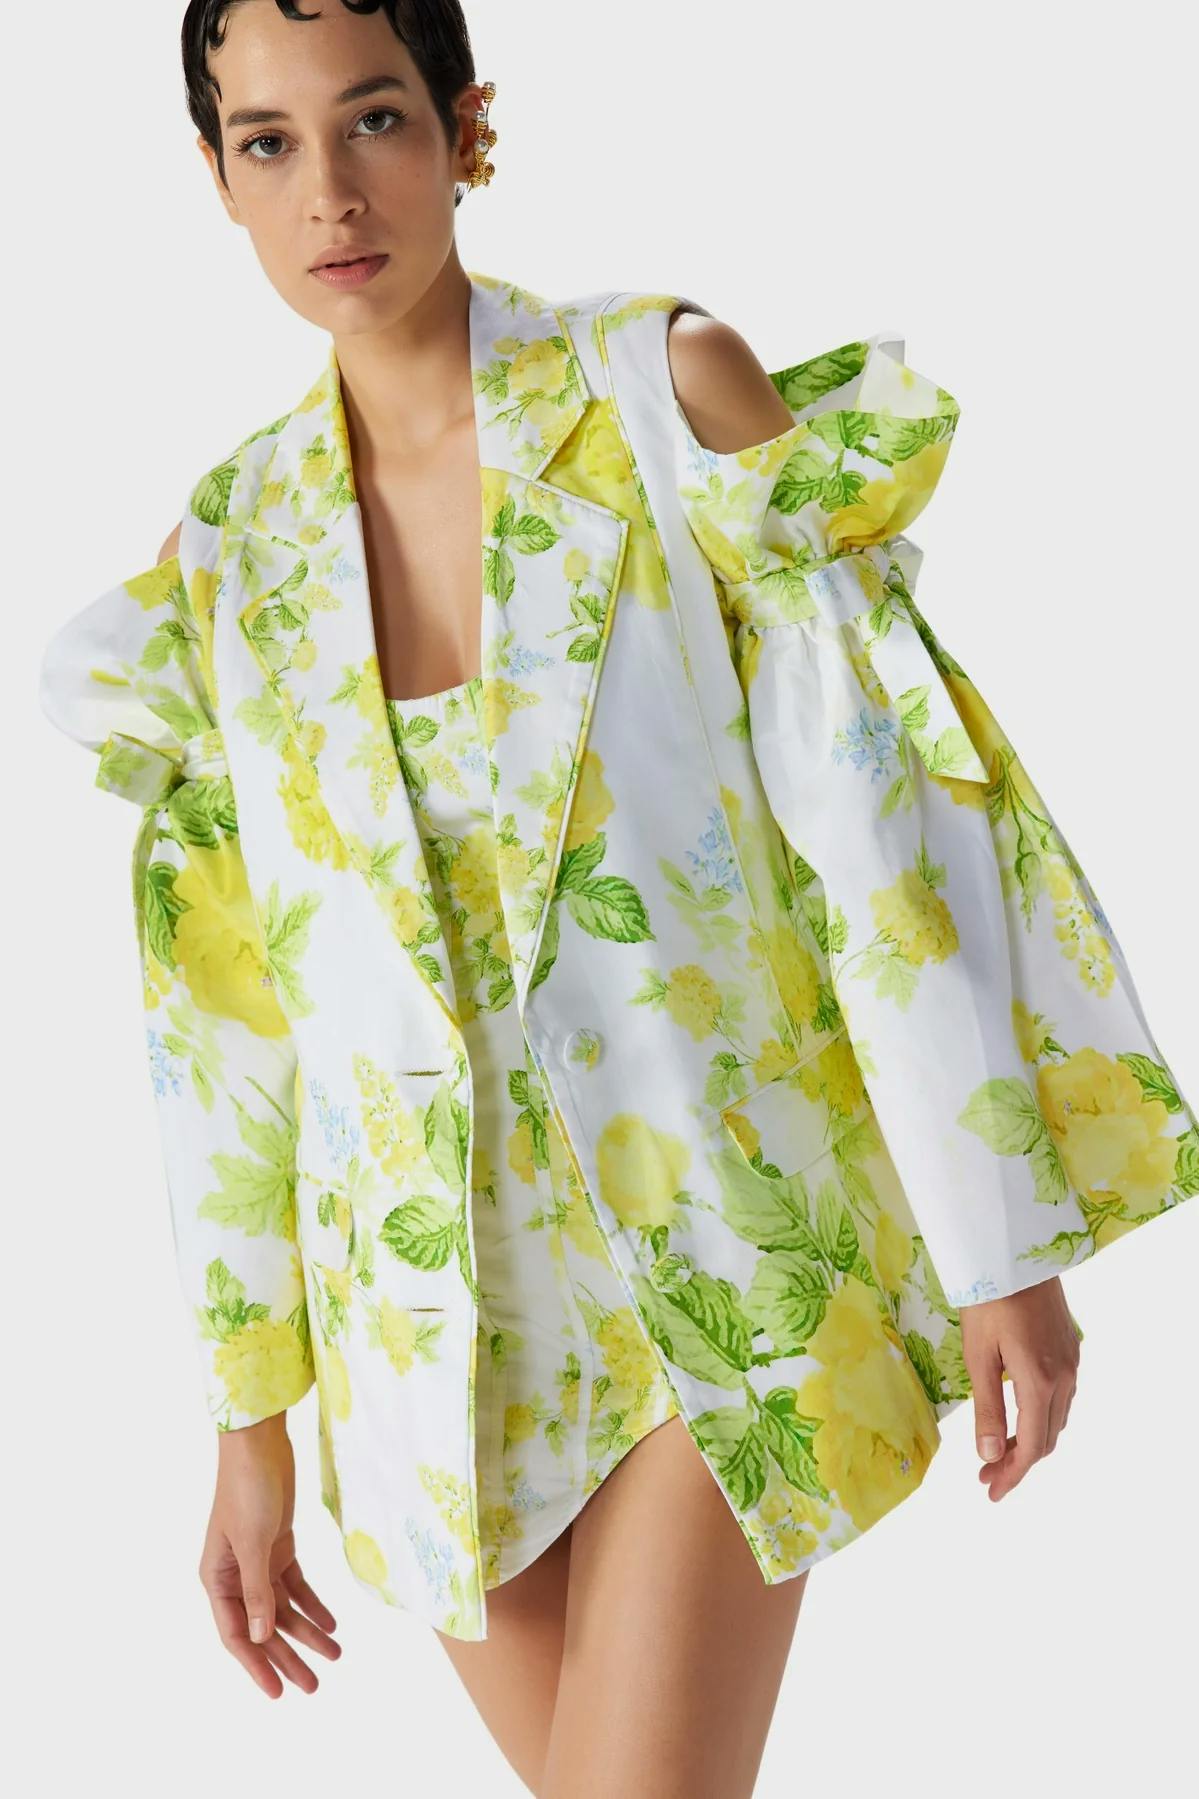 Fleur Jacket, a product by THE IASO